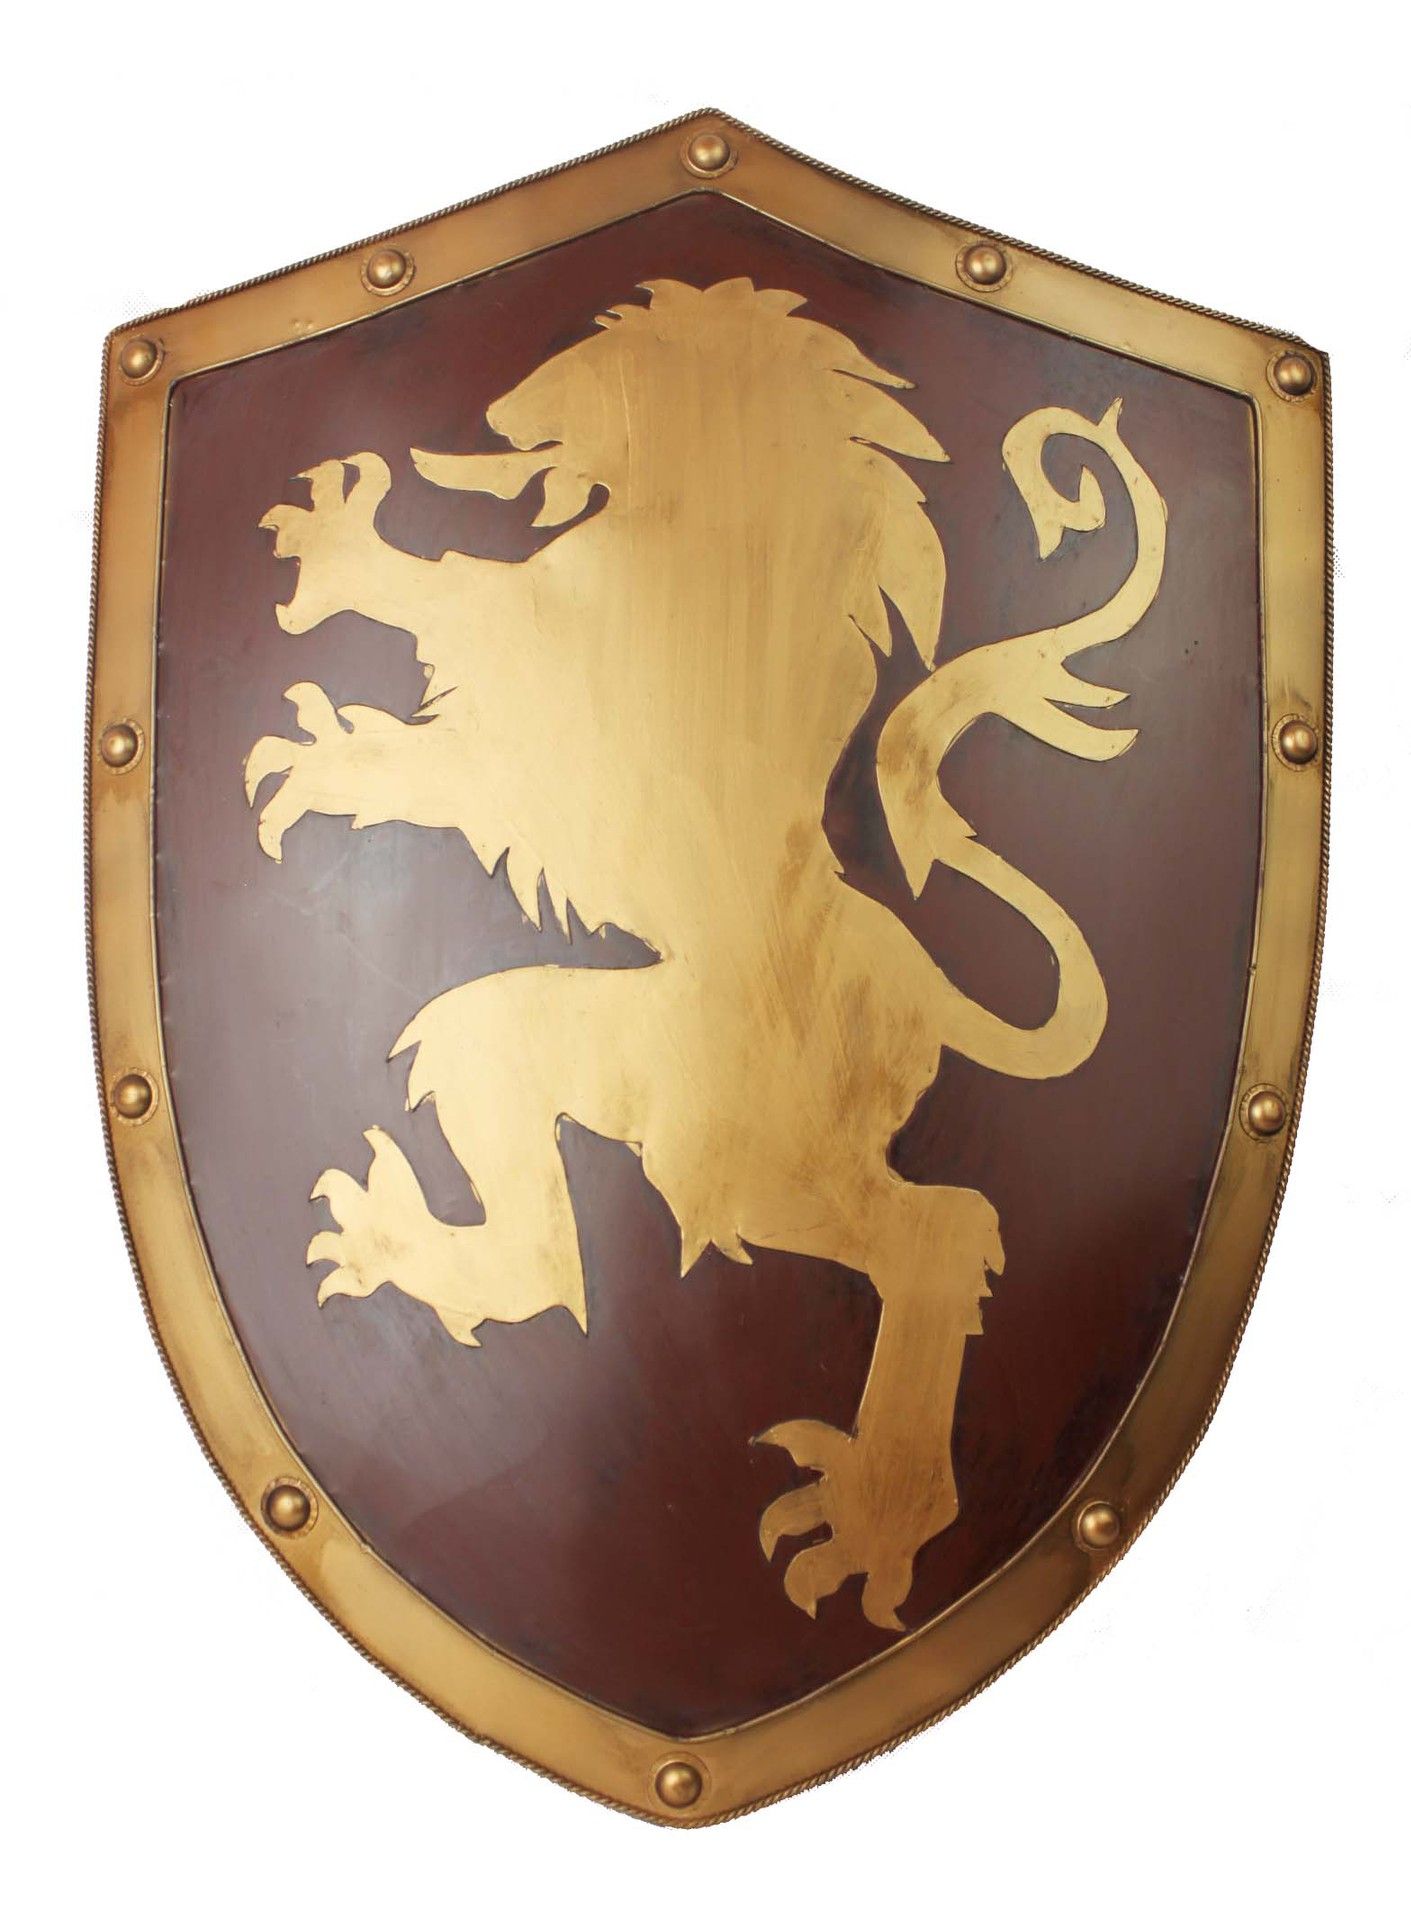 2019 Pure Manual Made Medieval Knight Shield, Lannister Lion Iron